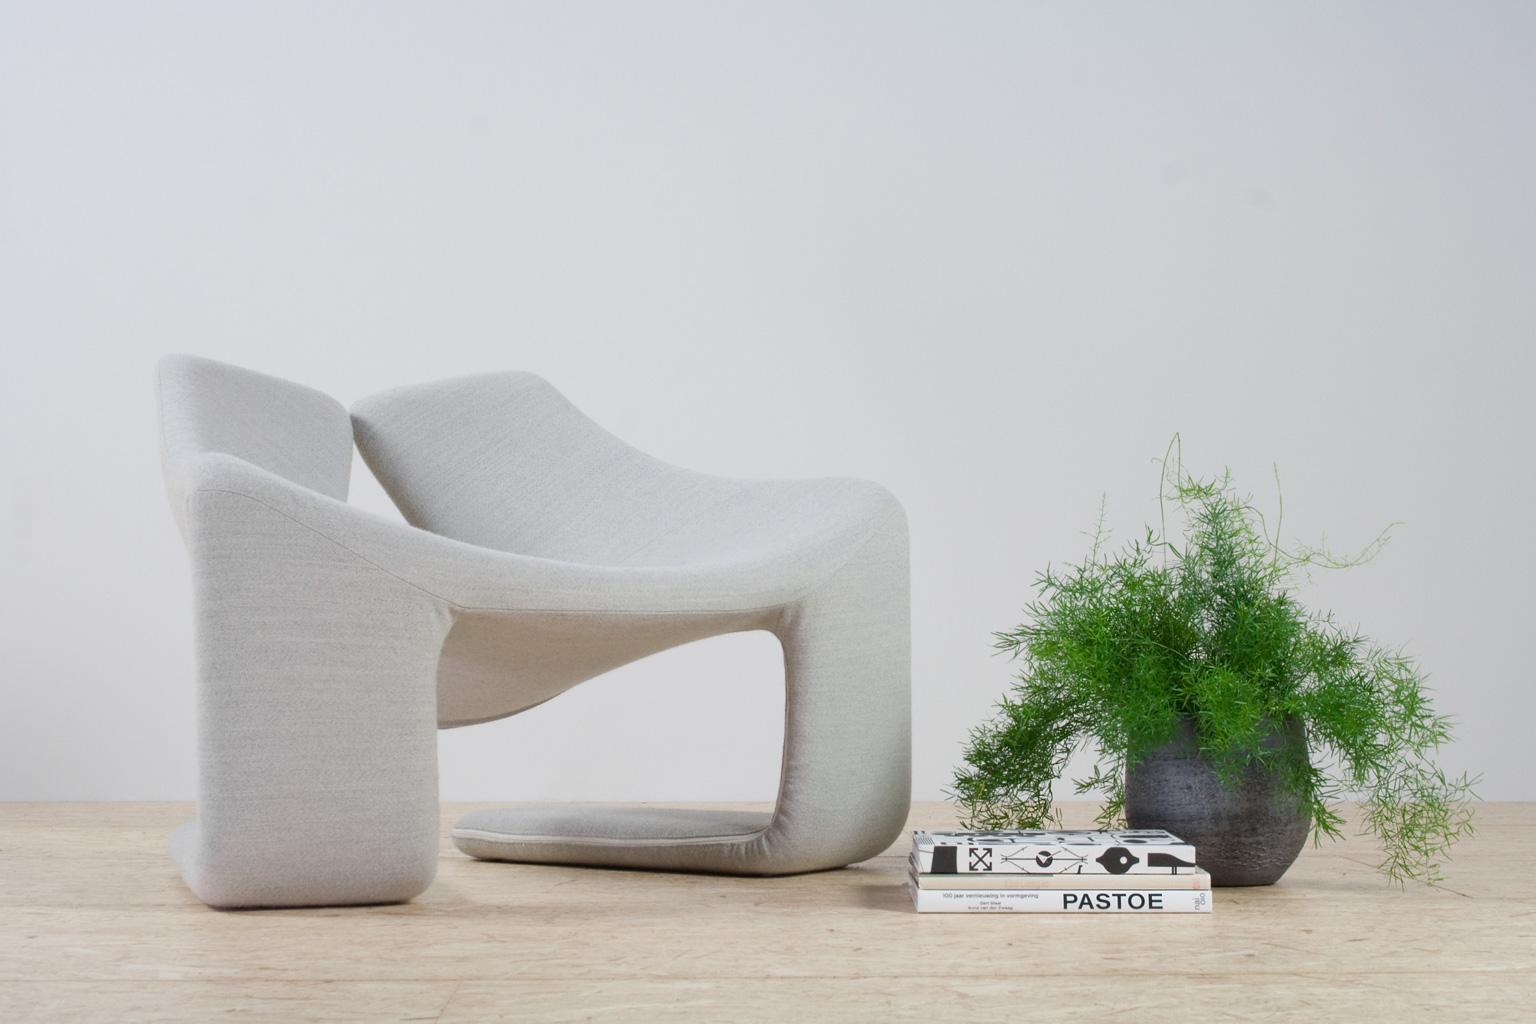 'Zen' lounge chair designed by Kwok Hoi Chan for Steiner Paris in 1968. This piece is an original from this period, completely restored with new light grey wool upholstery. Very good comfort. This model refers to an imaginary alphabet borrowed from